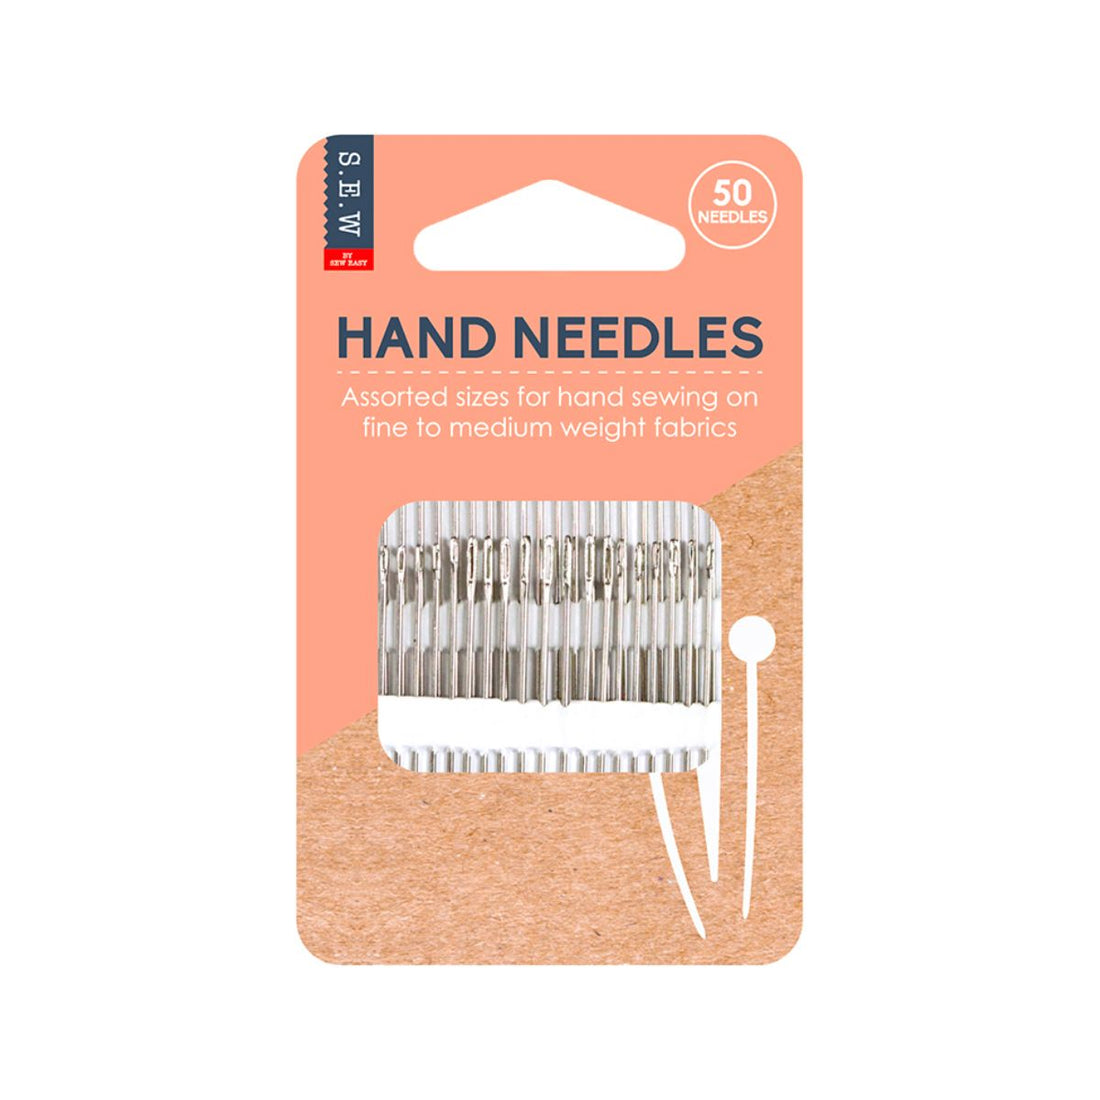 Sew easy hand sewing needles assorted 50 pack